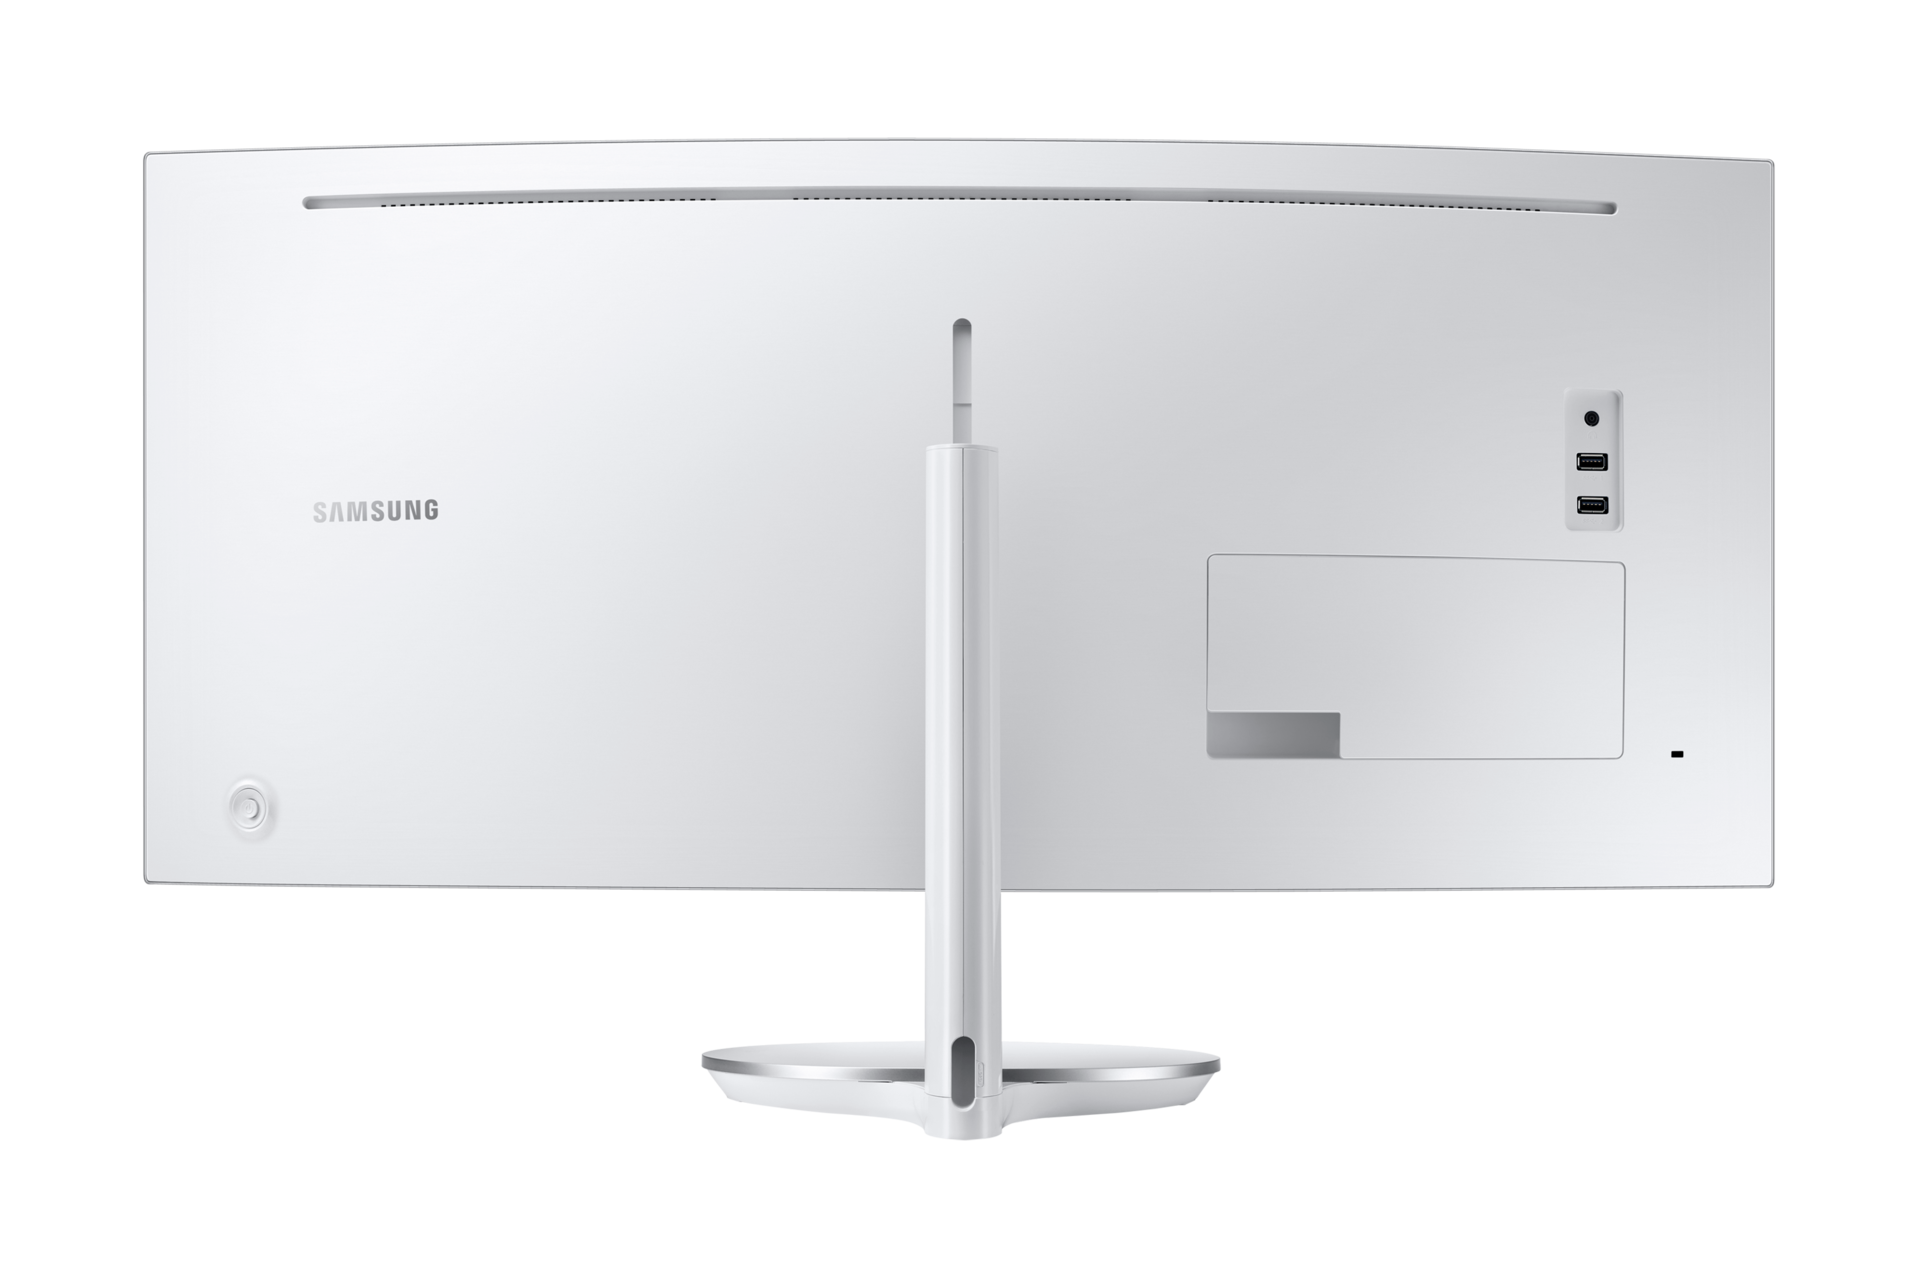 http://images.samsung.com/is/image/samsung/fr-curved-cf791-lc34f791wquxen-002-back-white?$PD_GALLERY_JPG$